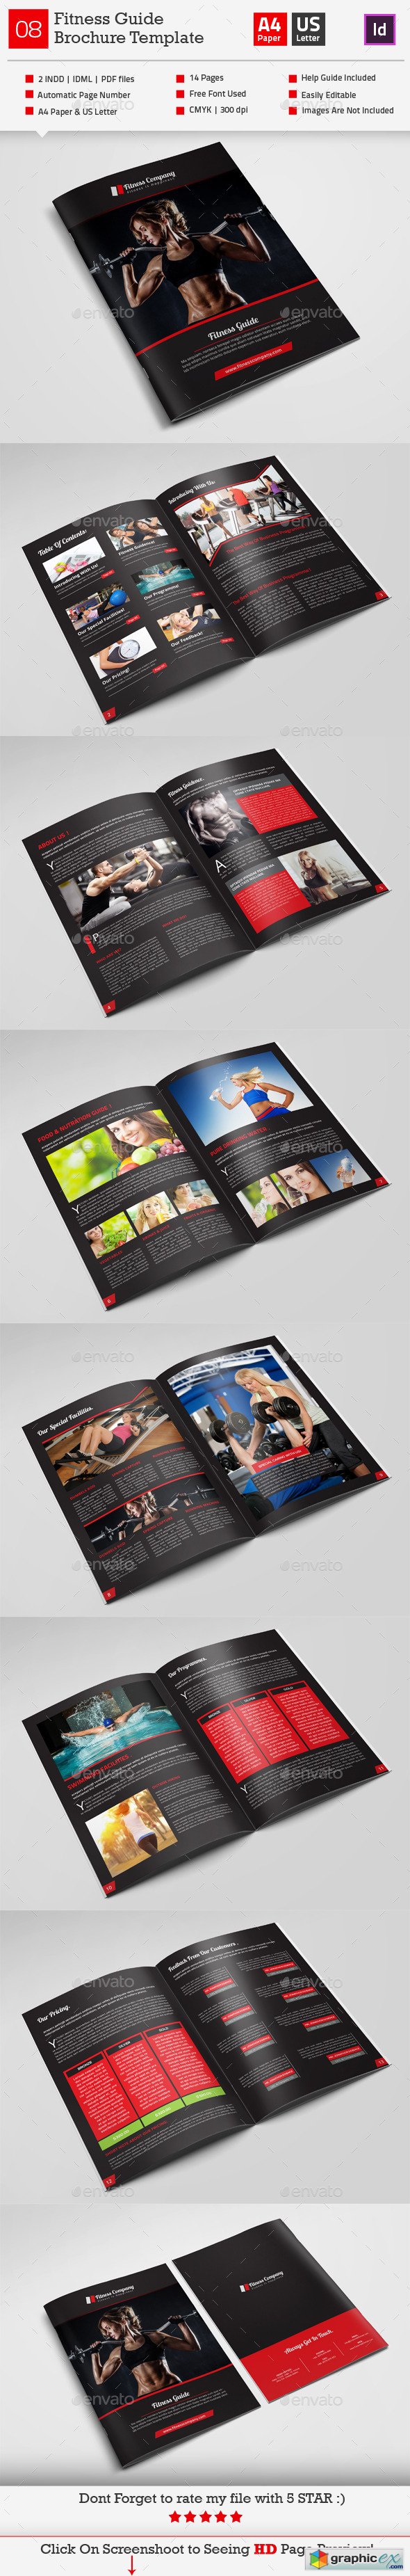 Fitness Guide Brochure Template